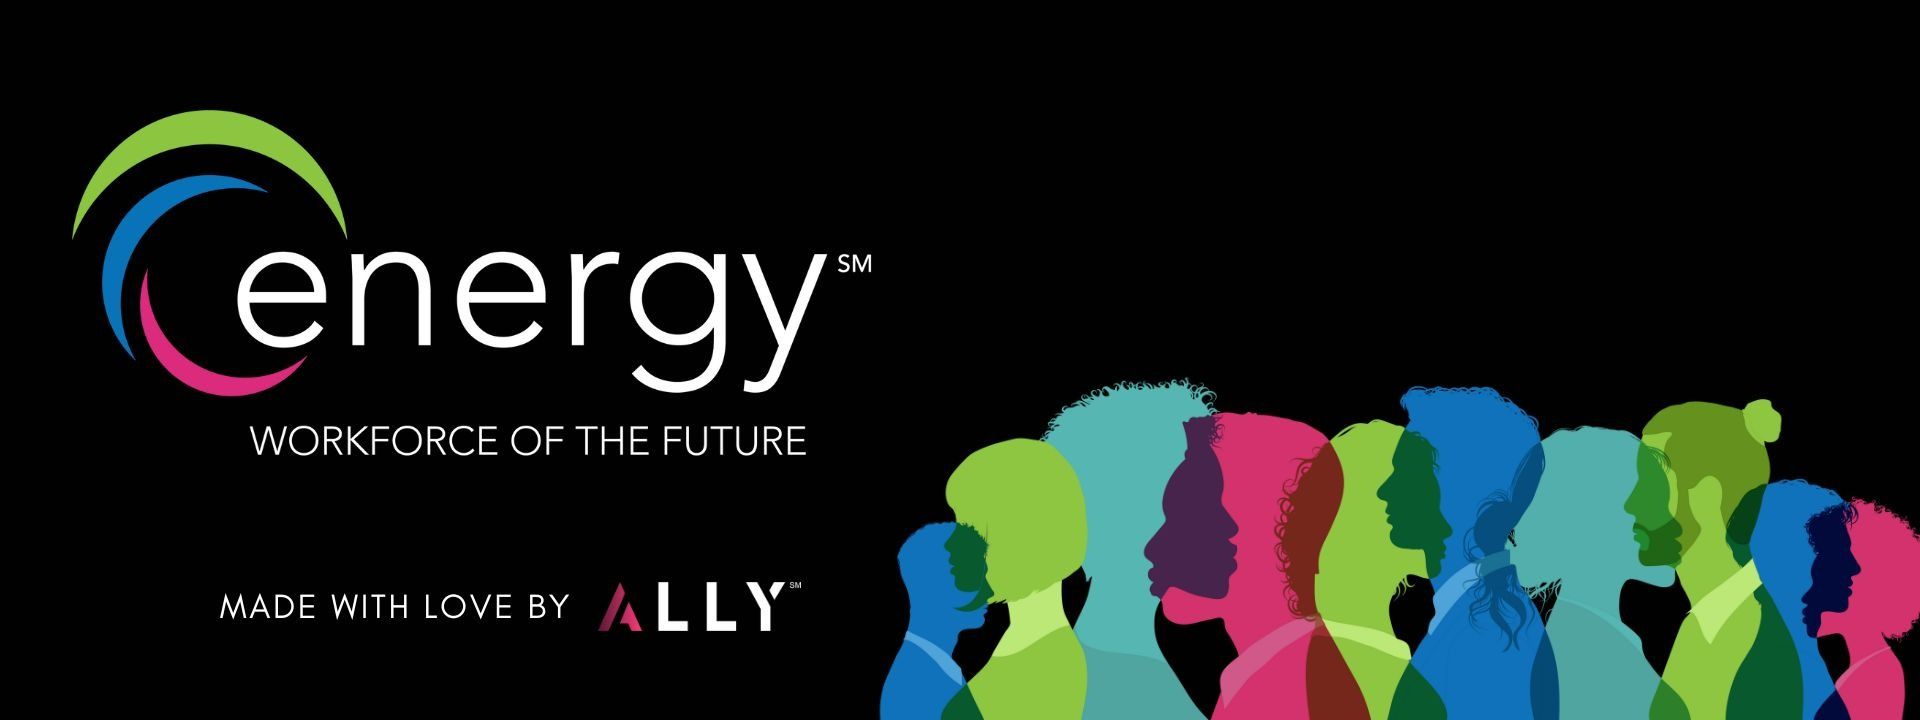 Energy Workforce Of The Future Summit - ALLY Energy